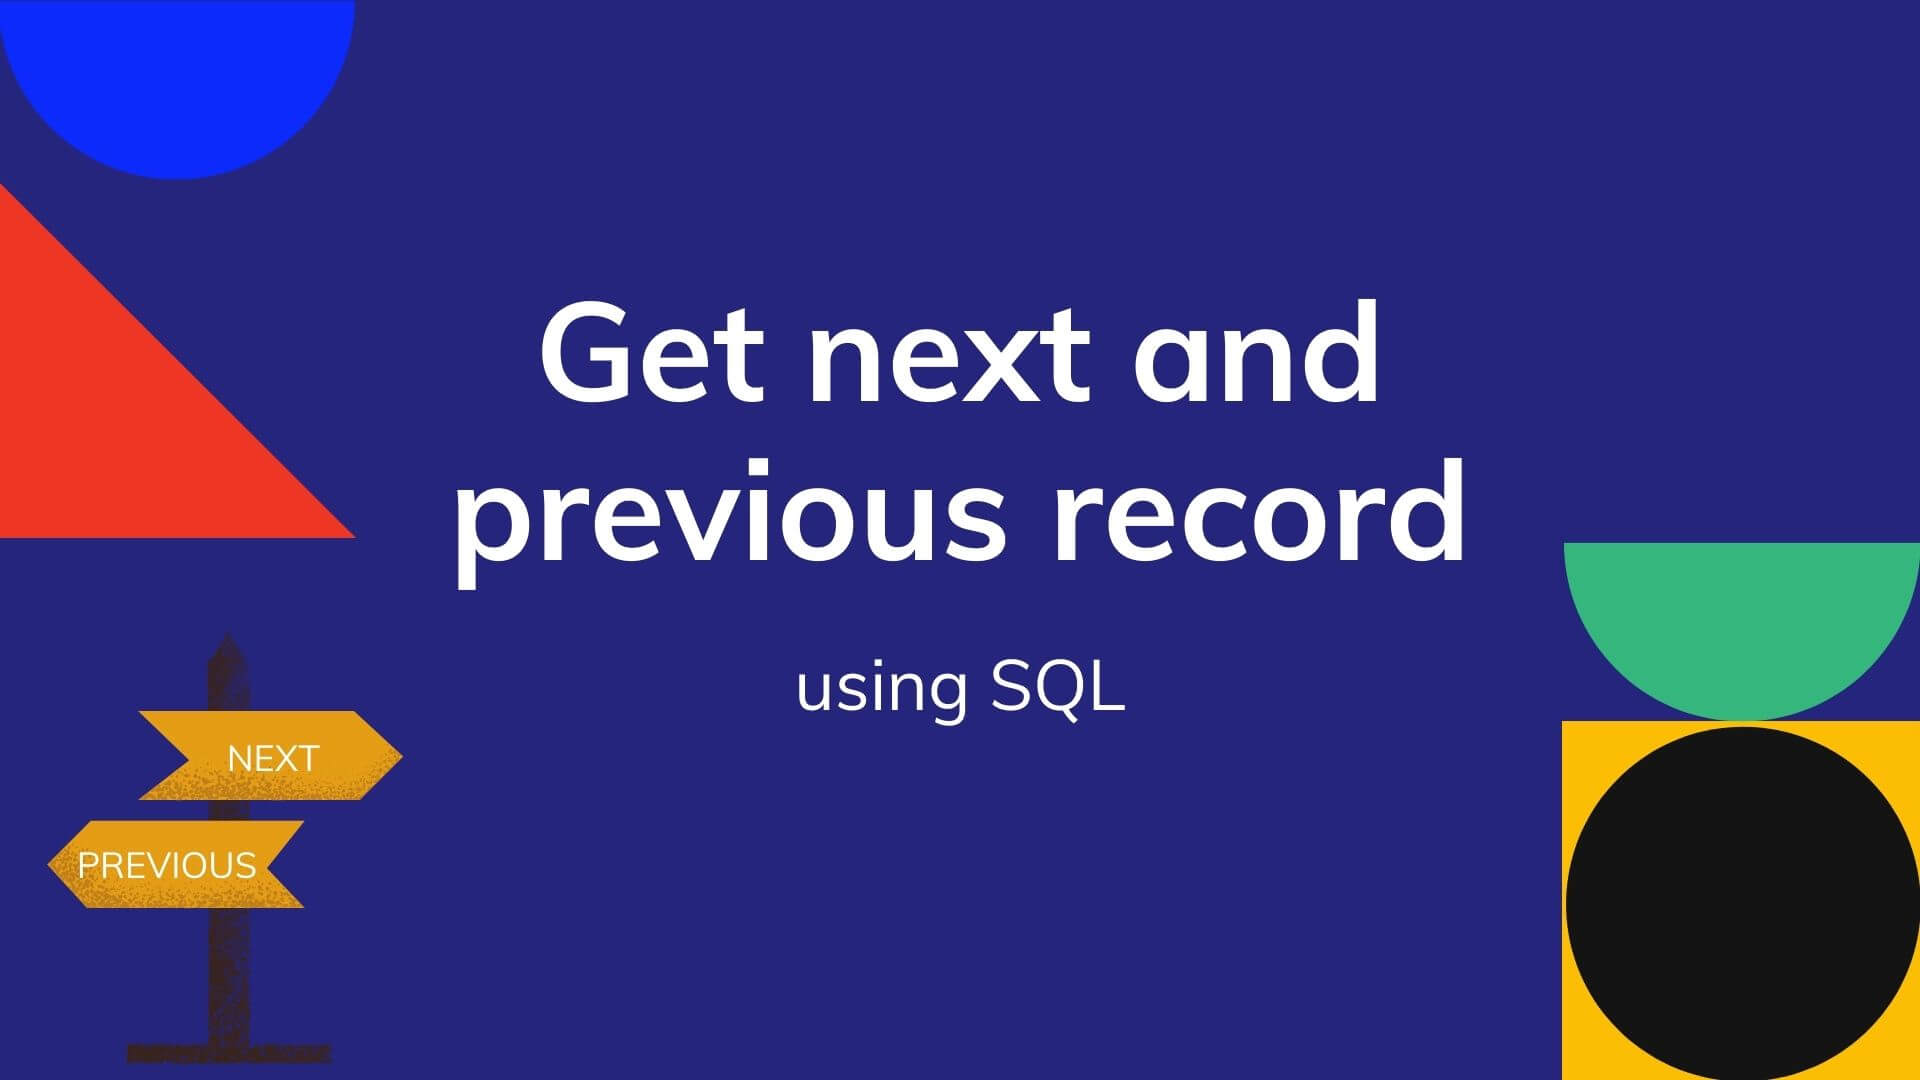 Get next and previous record in MySQL?